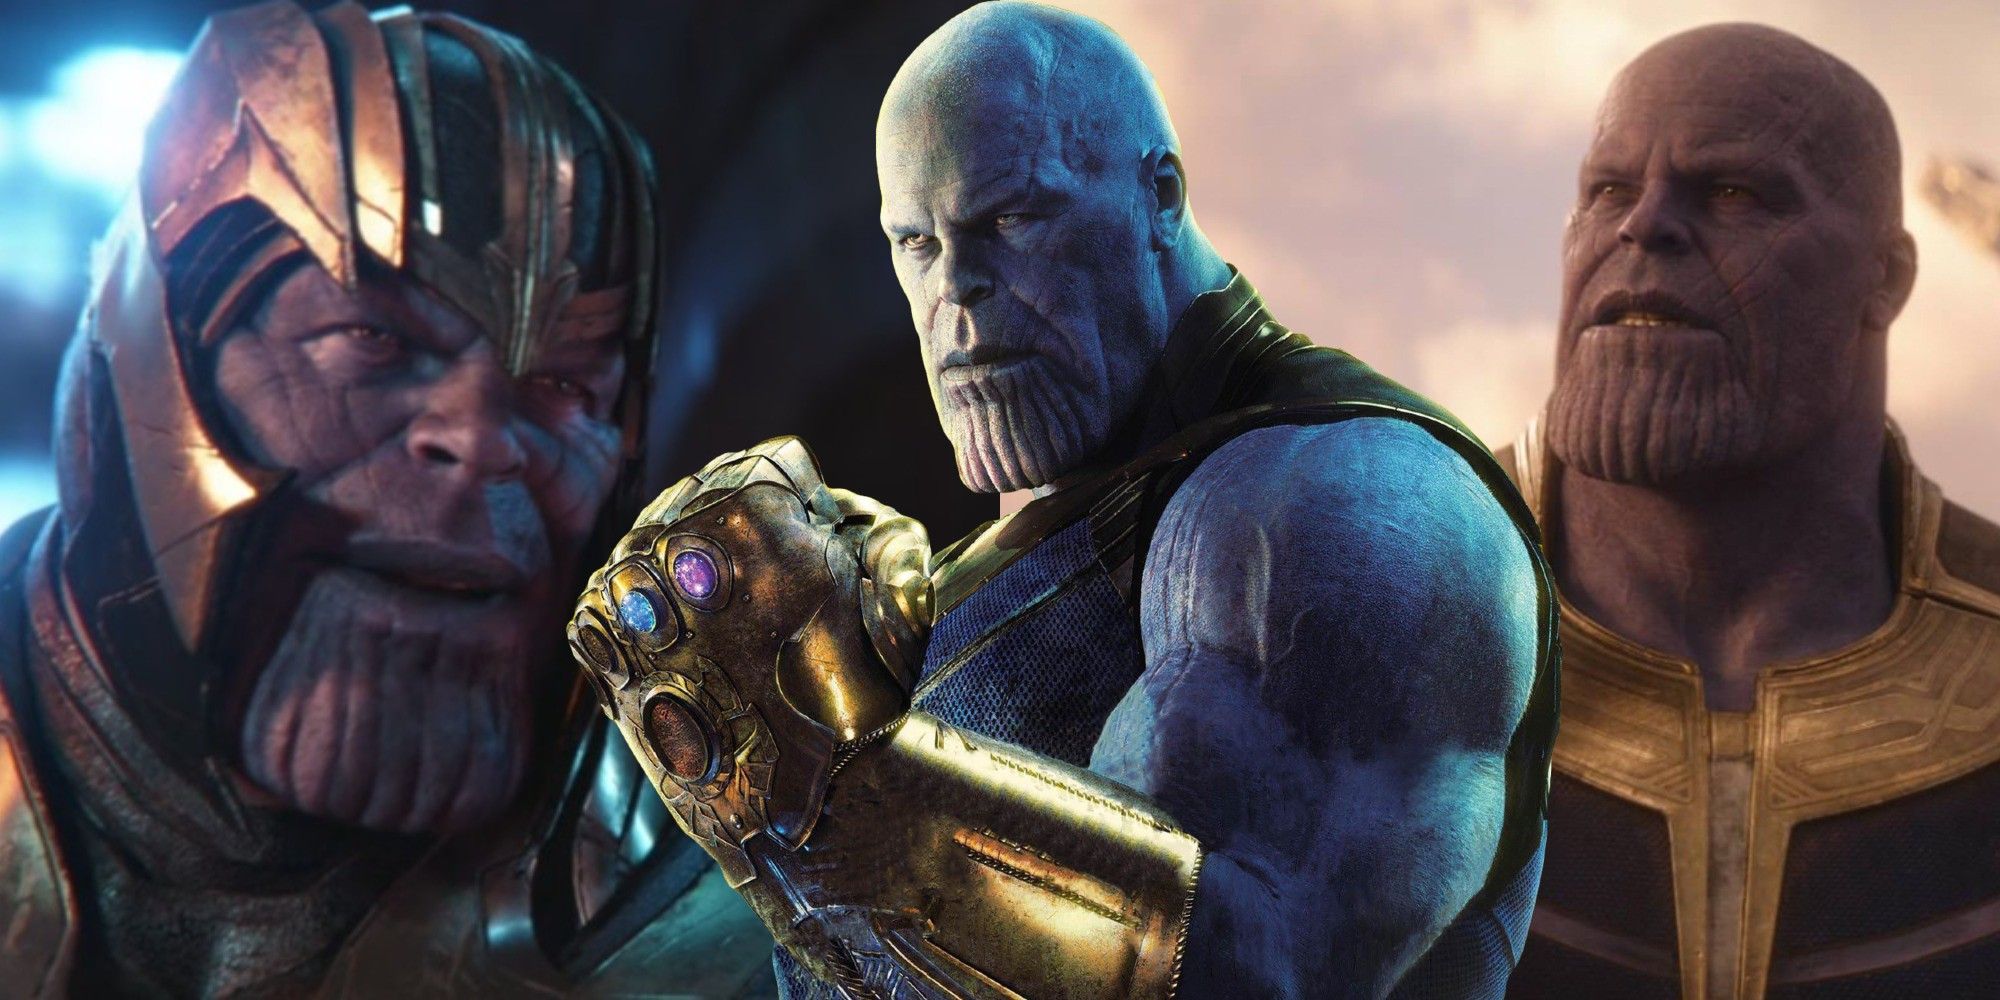 Split image of Thanos from the MCU